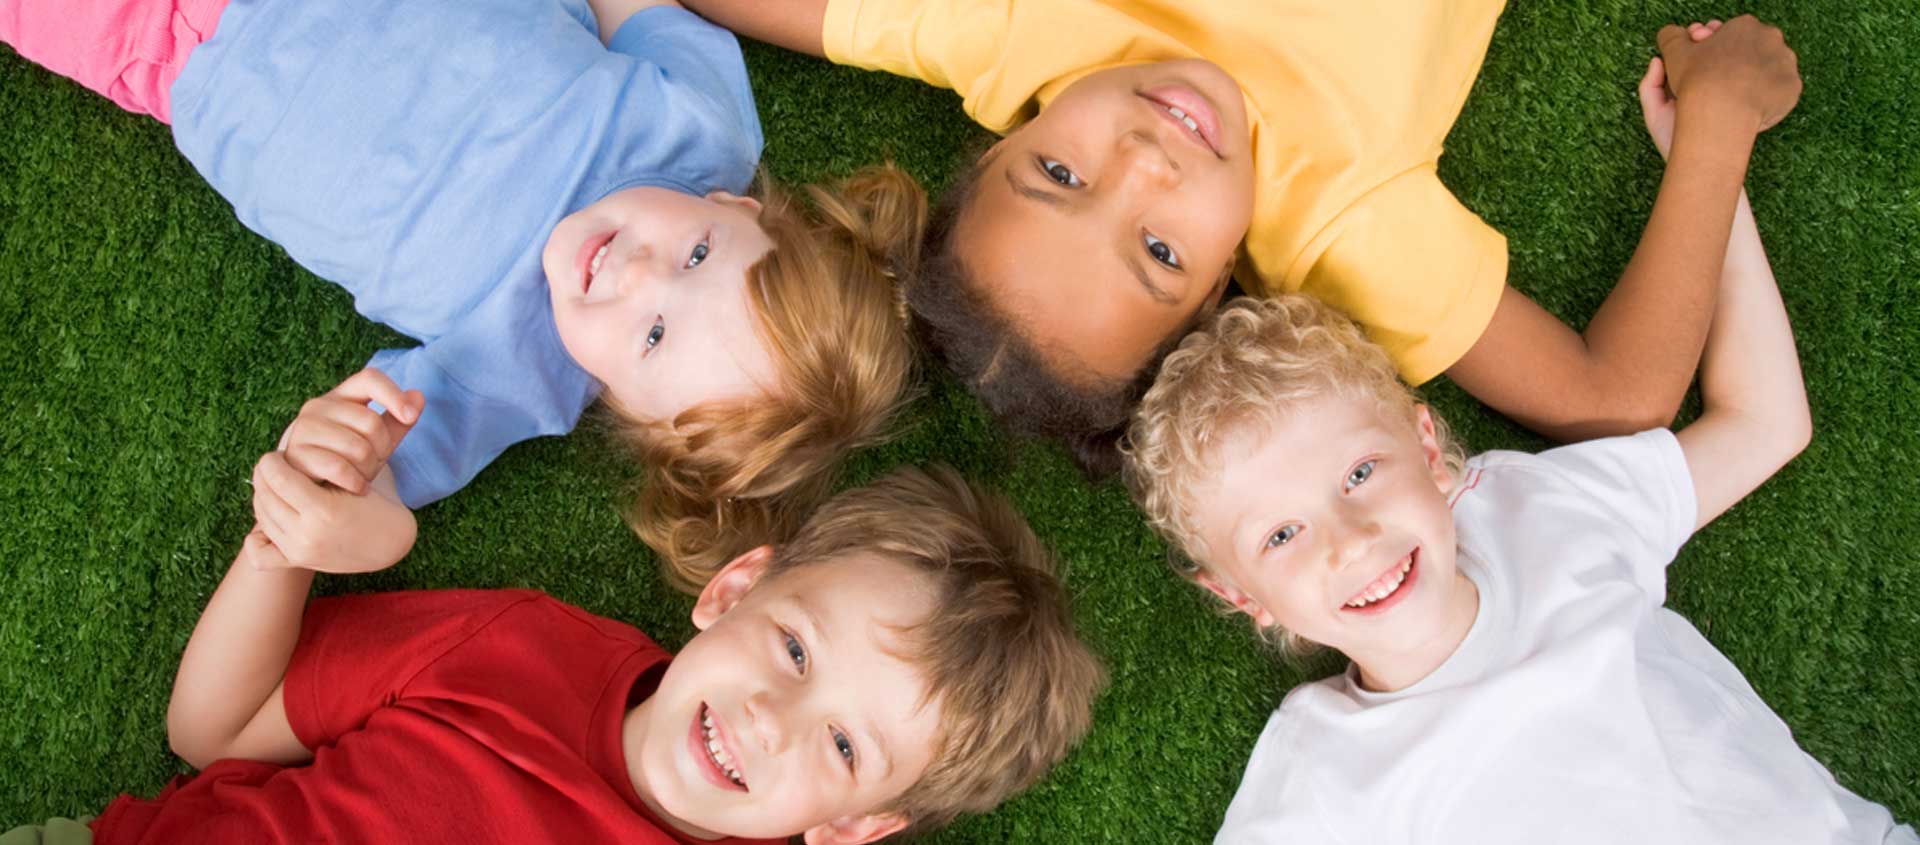 A diverse group of four children lay in the grass holding hands